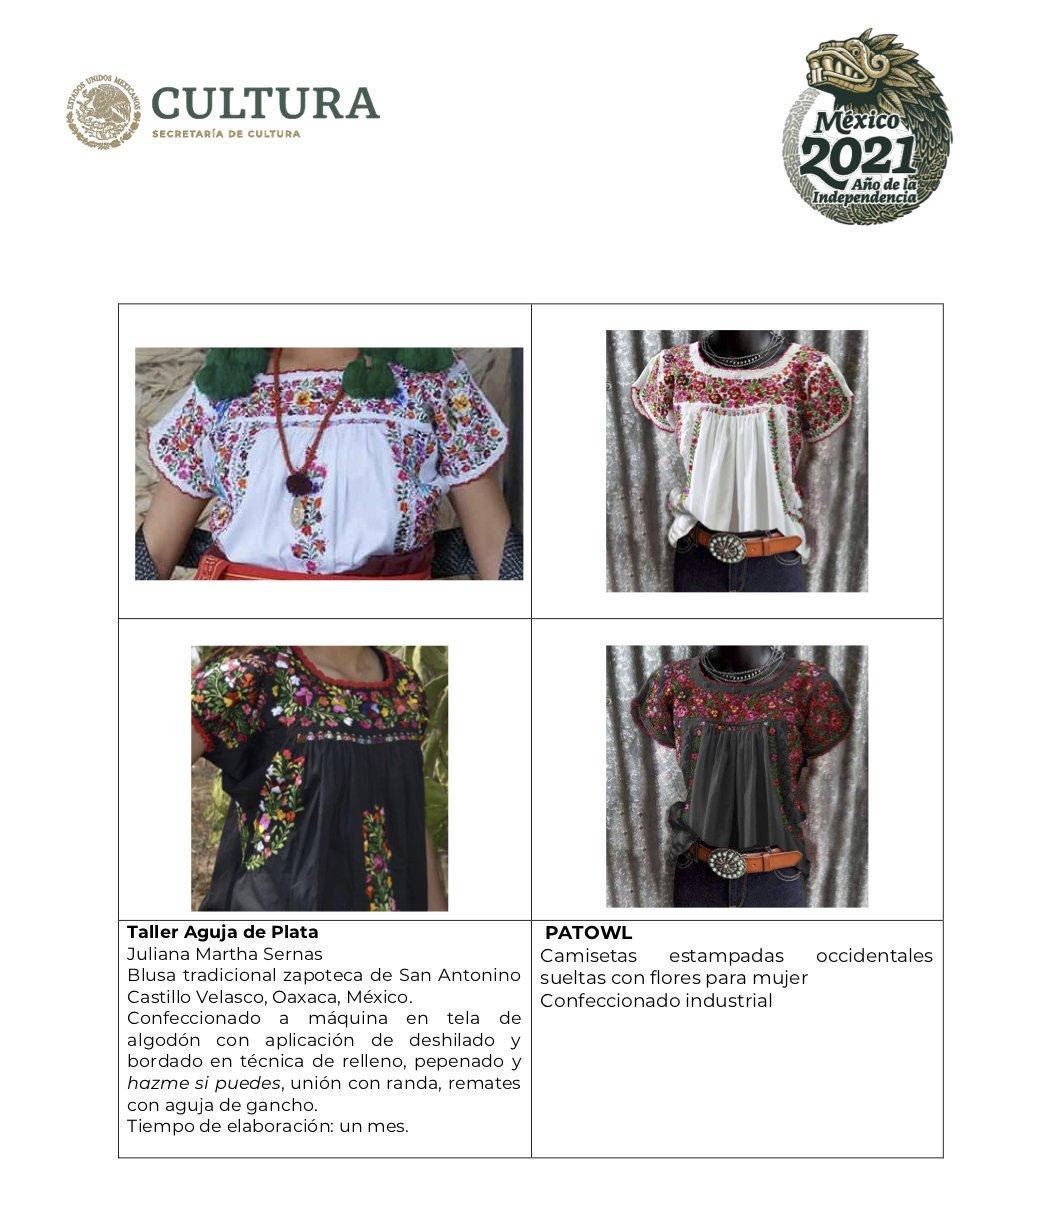 Ministry of Culture accused Zara, Anthropologie and Potowl of using Oaxacan designs in their clothing collection